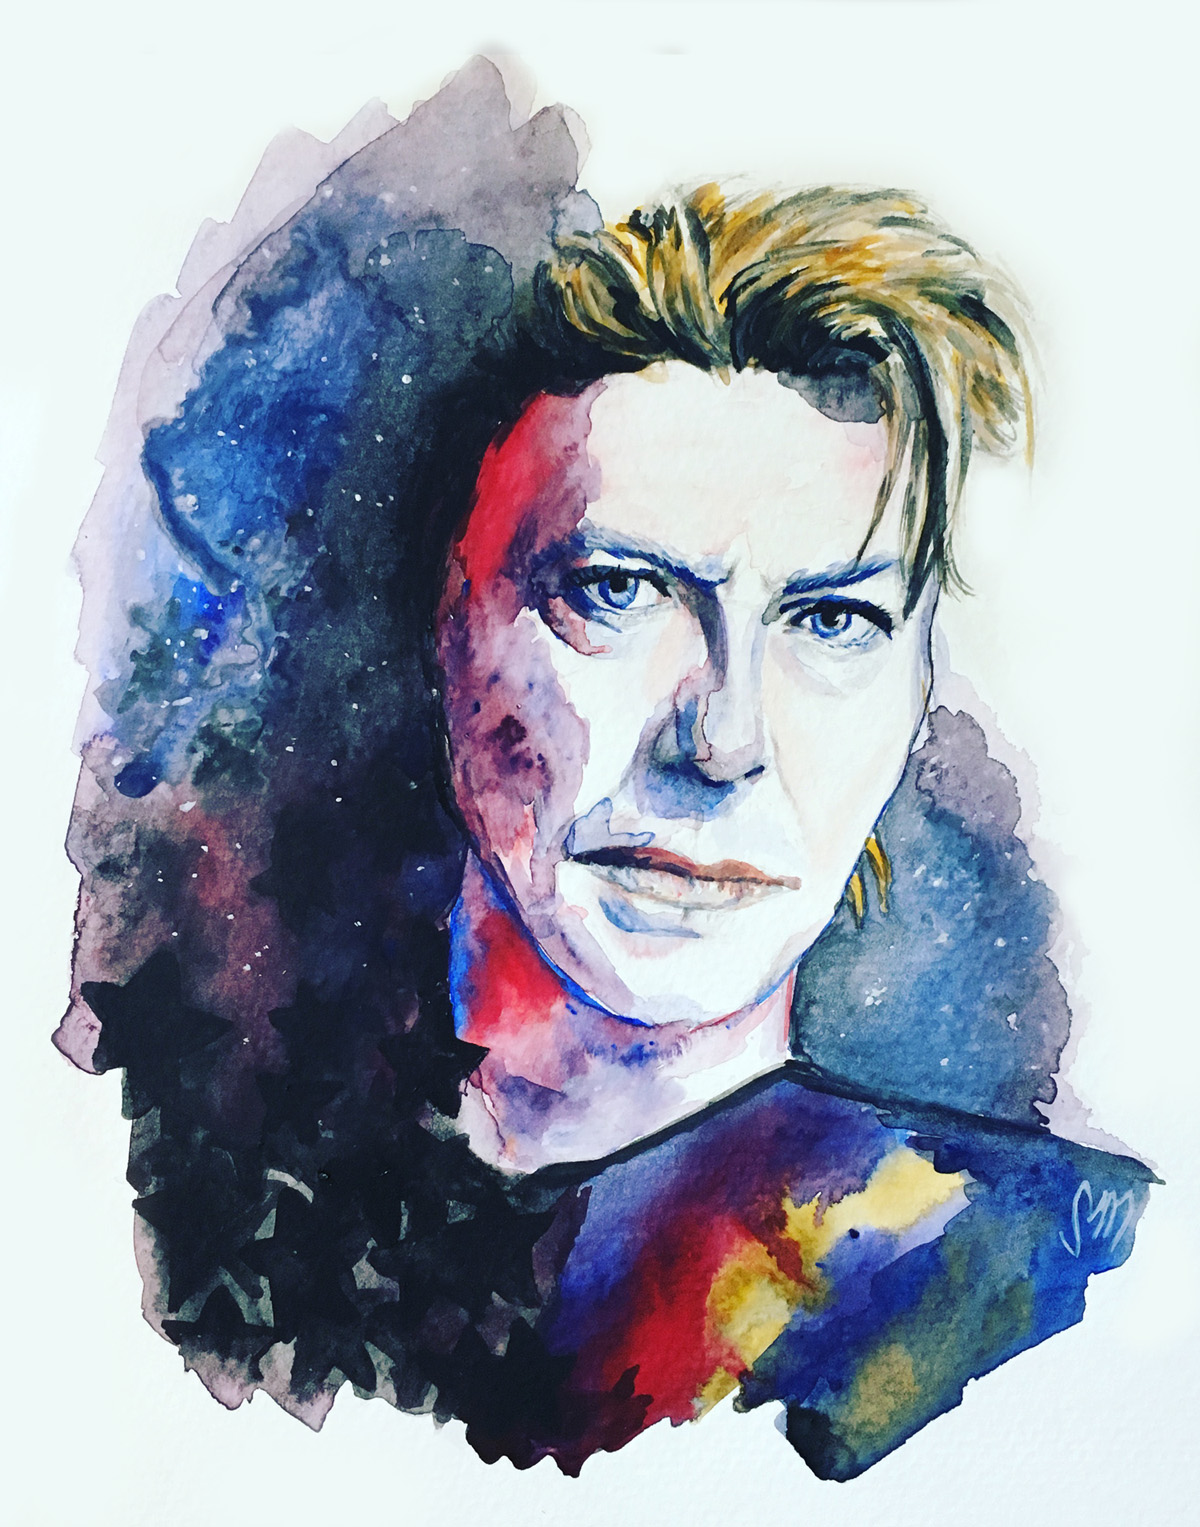 Farewell to the Black Star, David Bowie